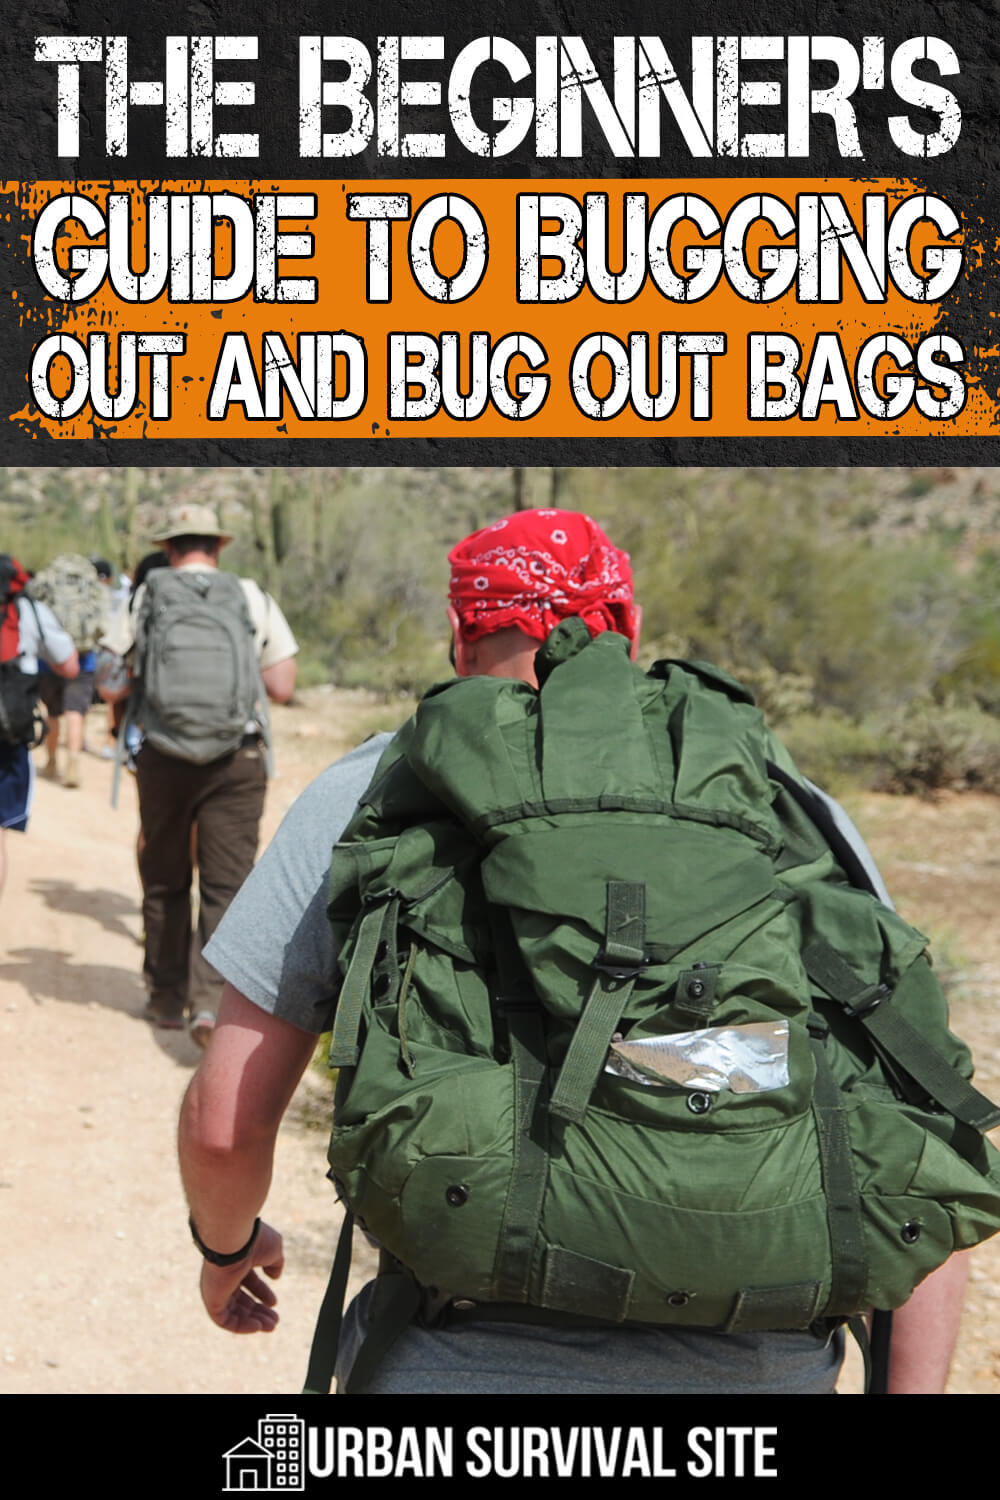 The Beginner's Guide to Bugging Out and Bug Out Bags